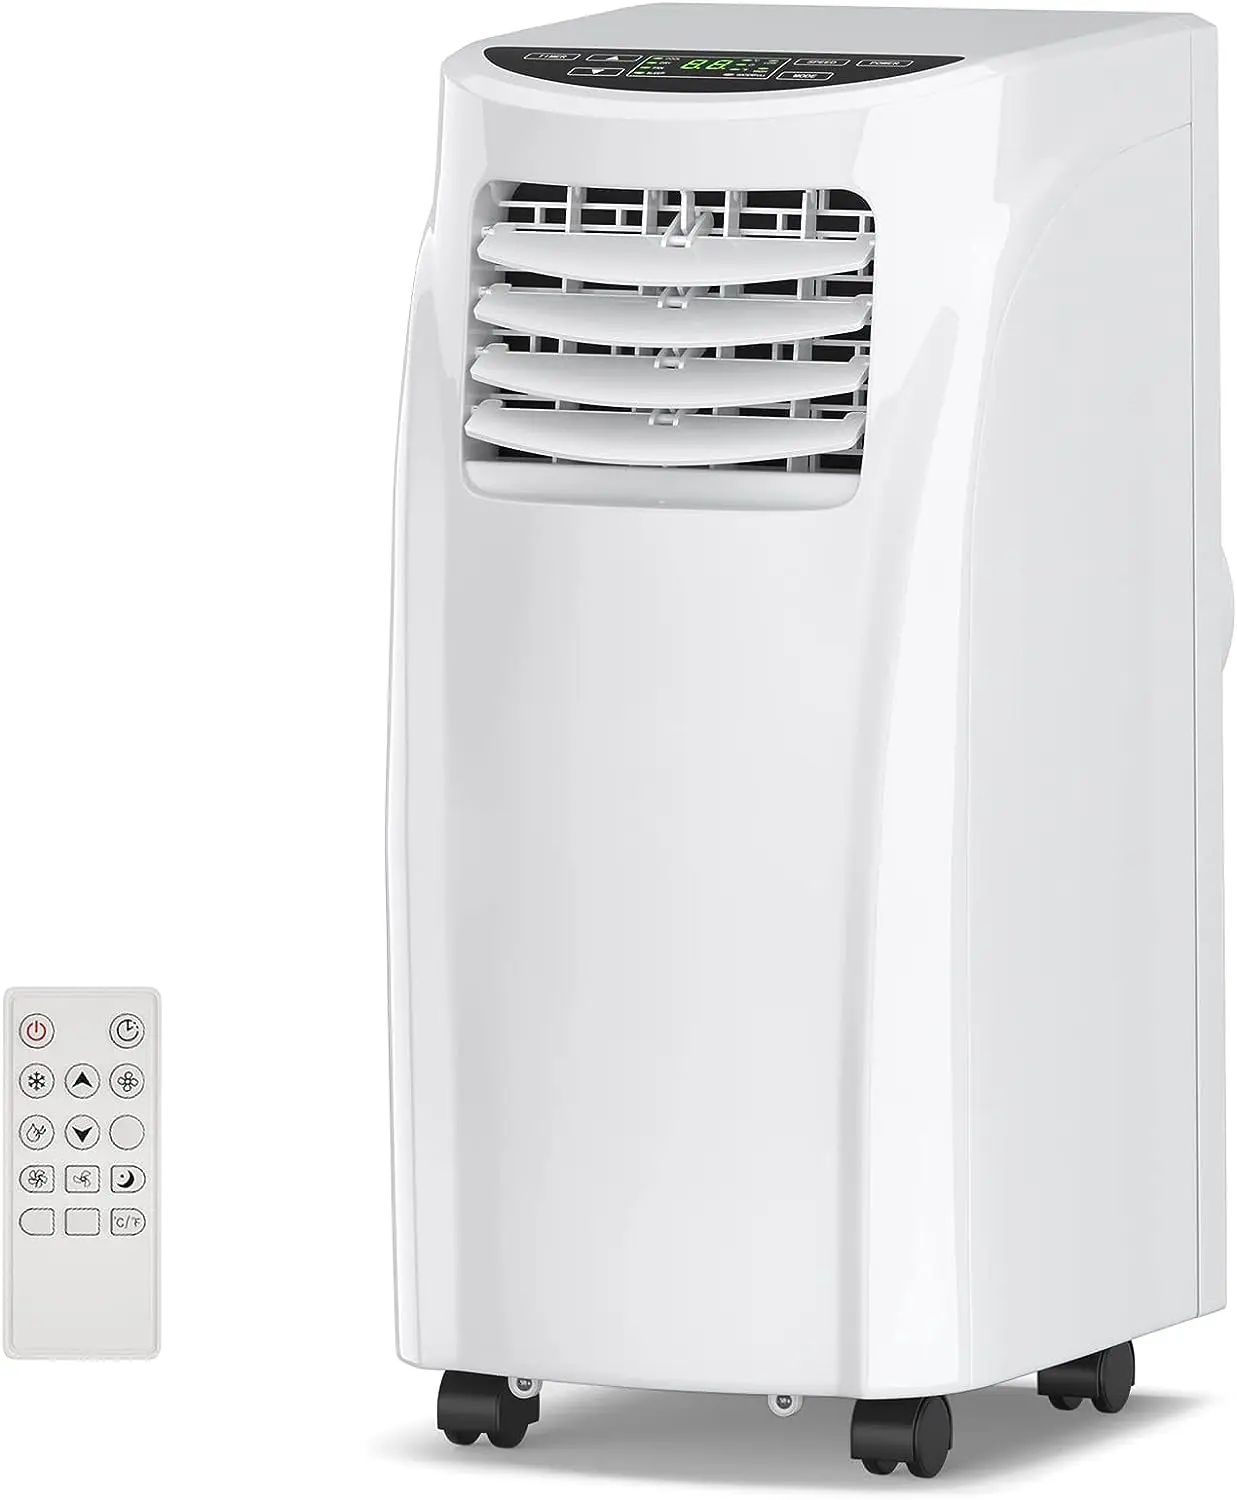 

Air Conditioners, 8000 BTU Air Conditioner Unit spaces up to 230 Sq.Ft with Remote Control Dehumidifier Function Window Mount,